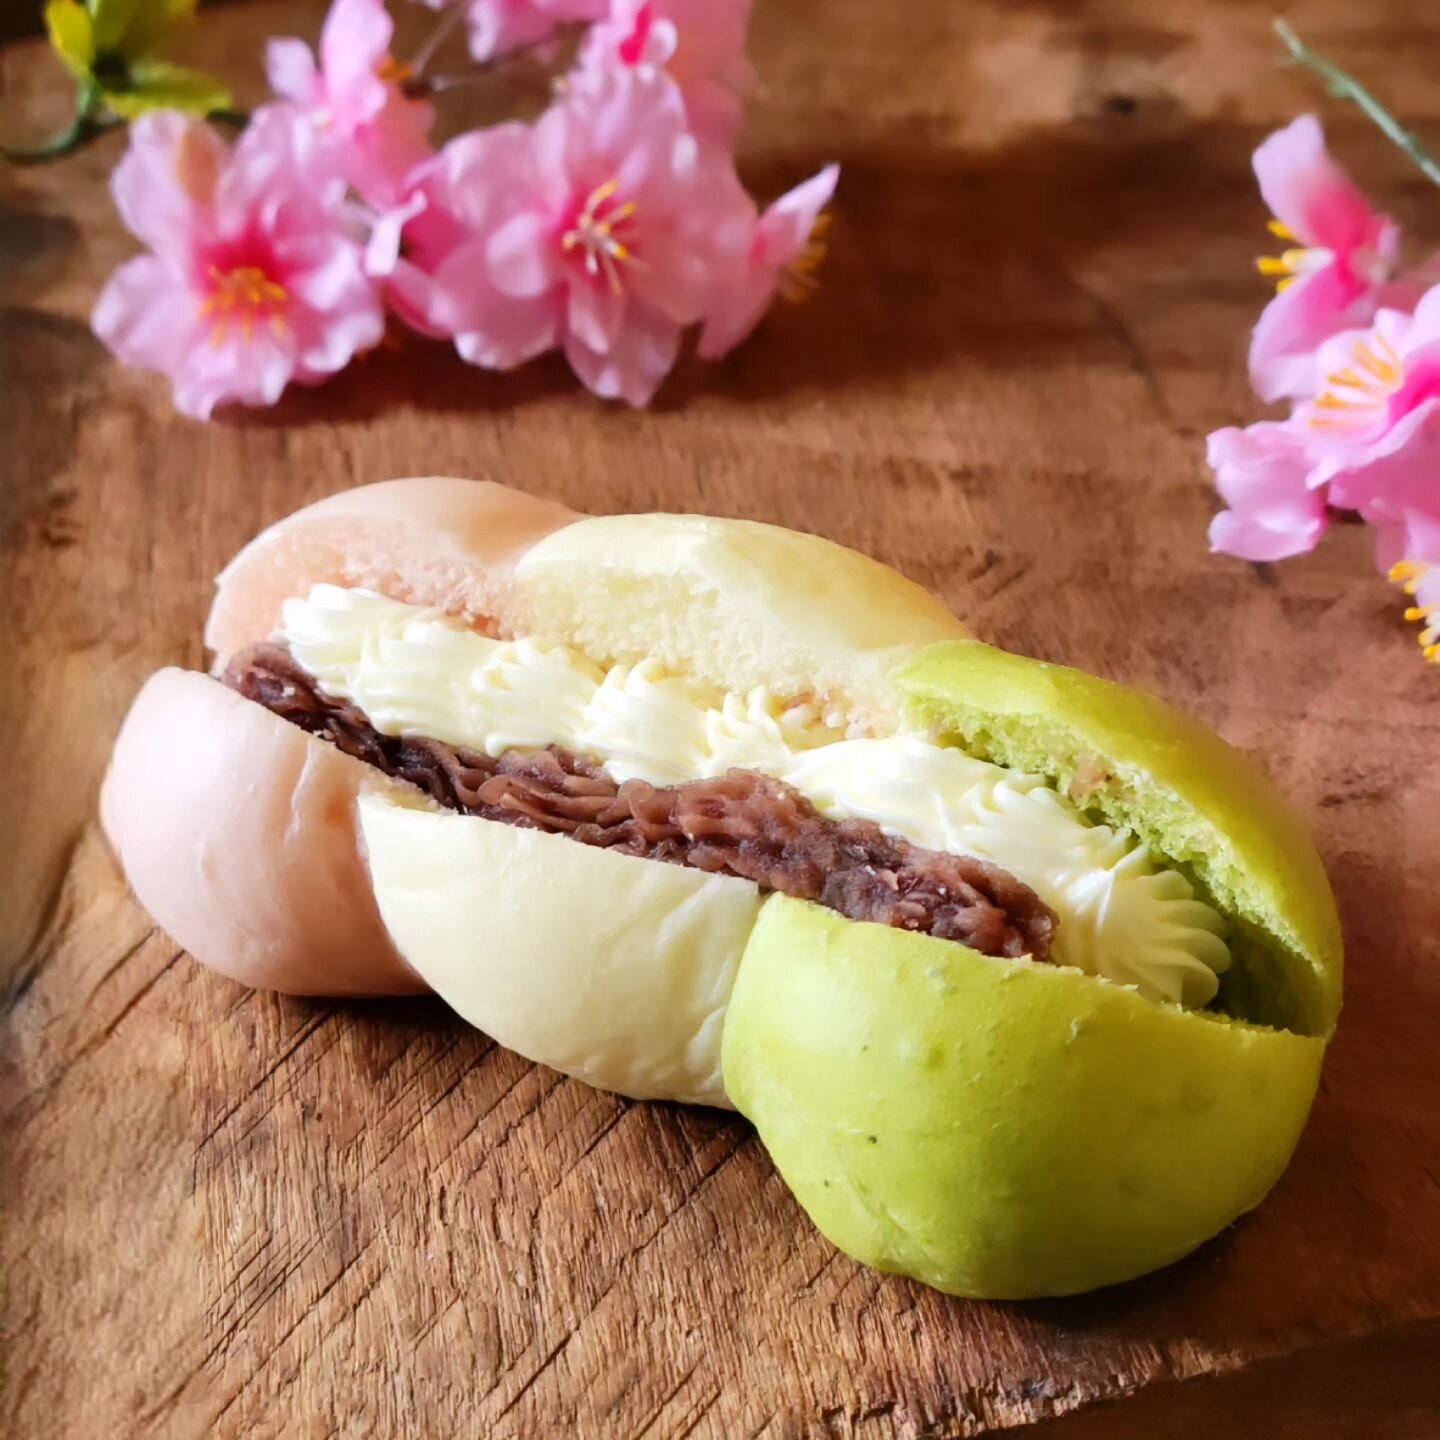 🌸 Celebrating Hinamatsuri with our new special item.. Odango! Inspired by the Japanese sweet dessert dango 🍡 this soft pastry bread is filled with sweet red bean and milk cream!

What is Hinamatsuri ❓️
Hinamatsuri means Doll Festival, but the day i